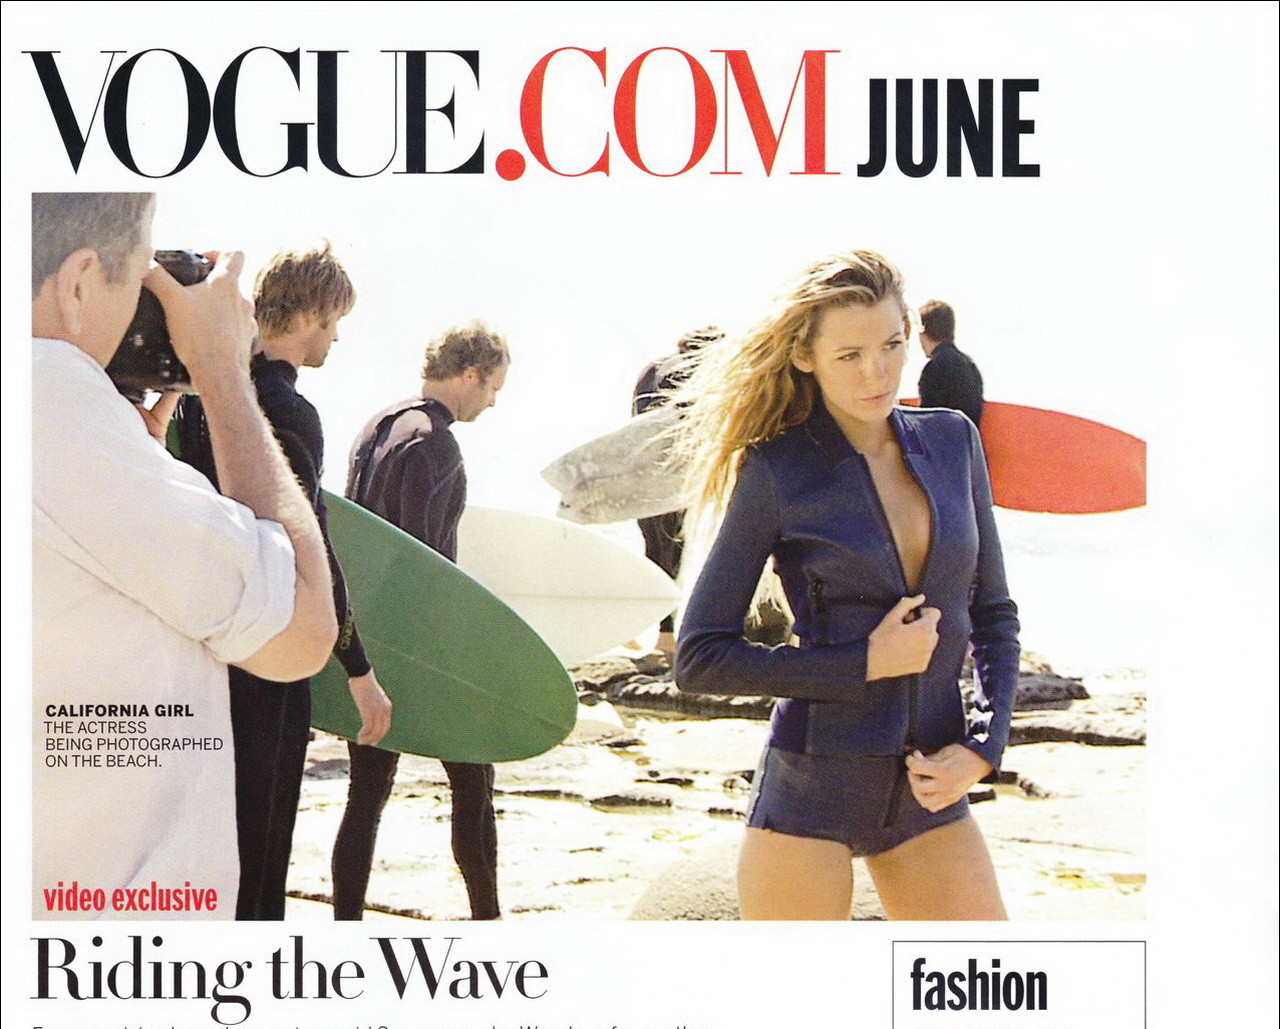 Blake Lively in hot beach photoshoot for Vogue US June issue #75348191